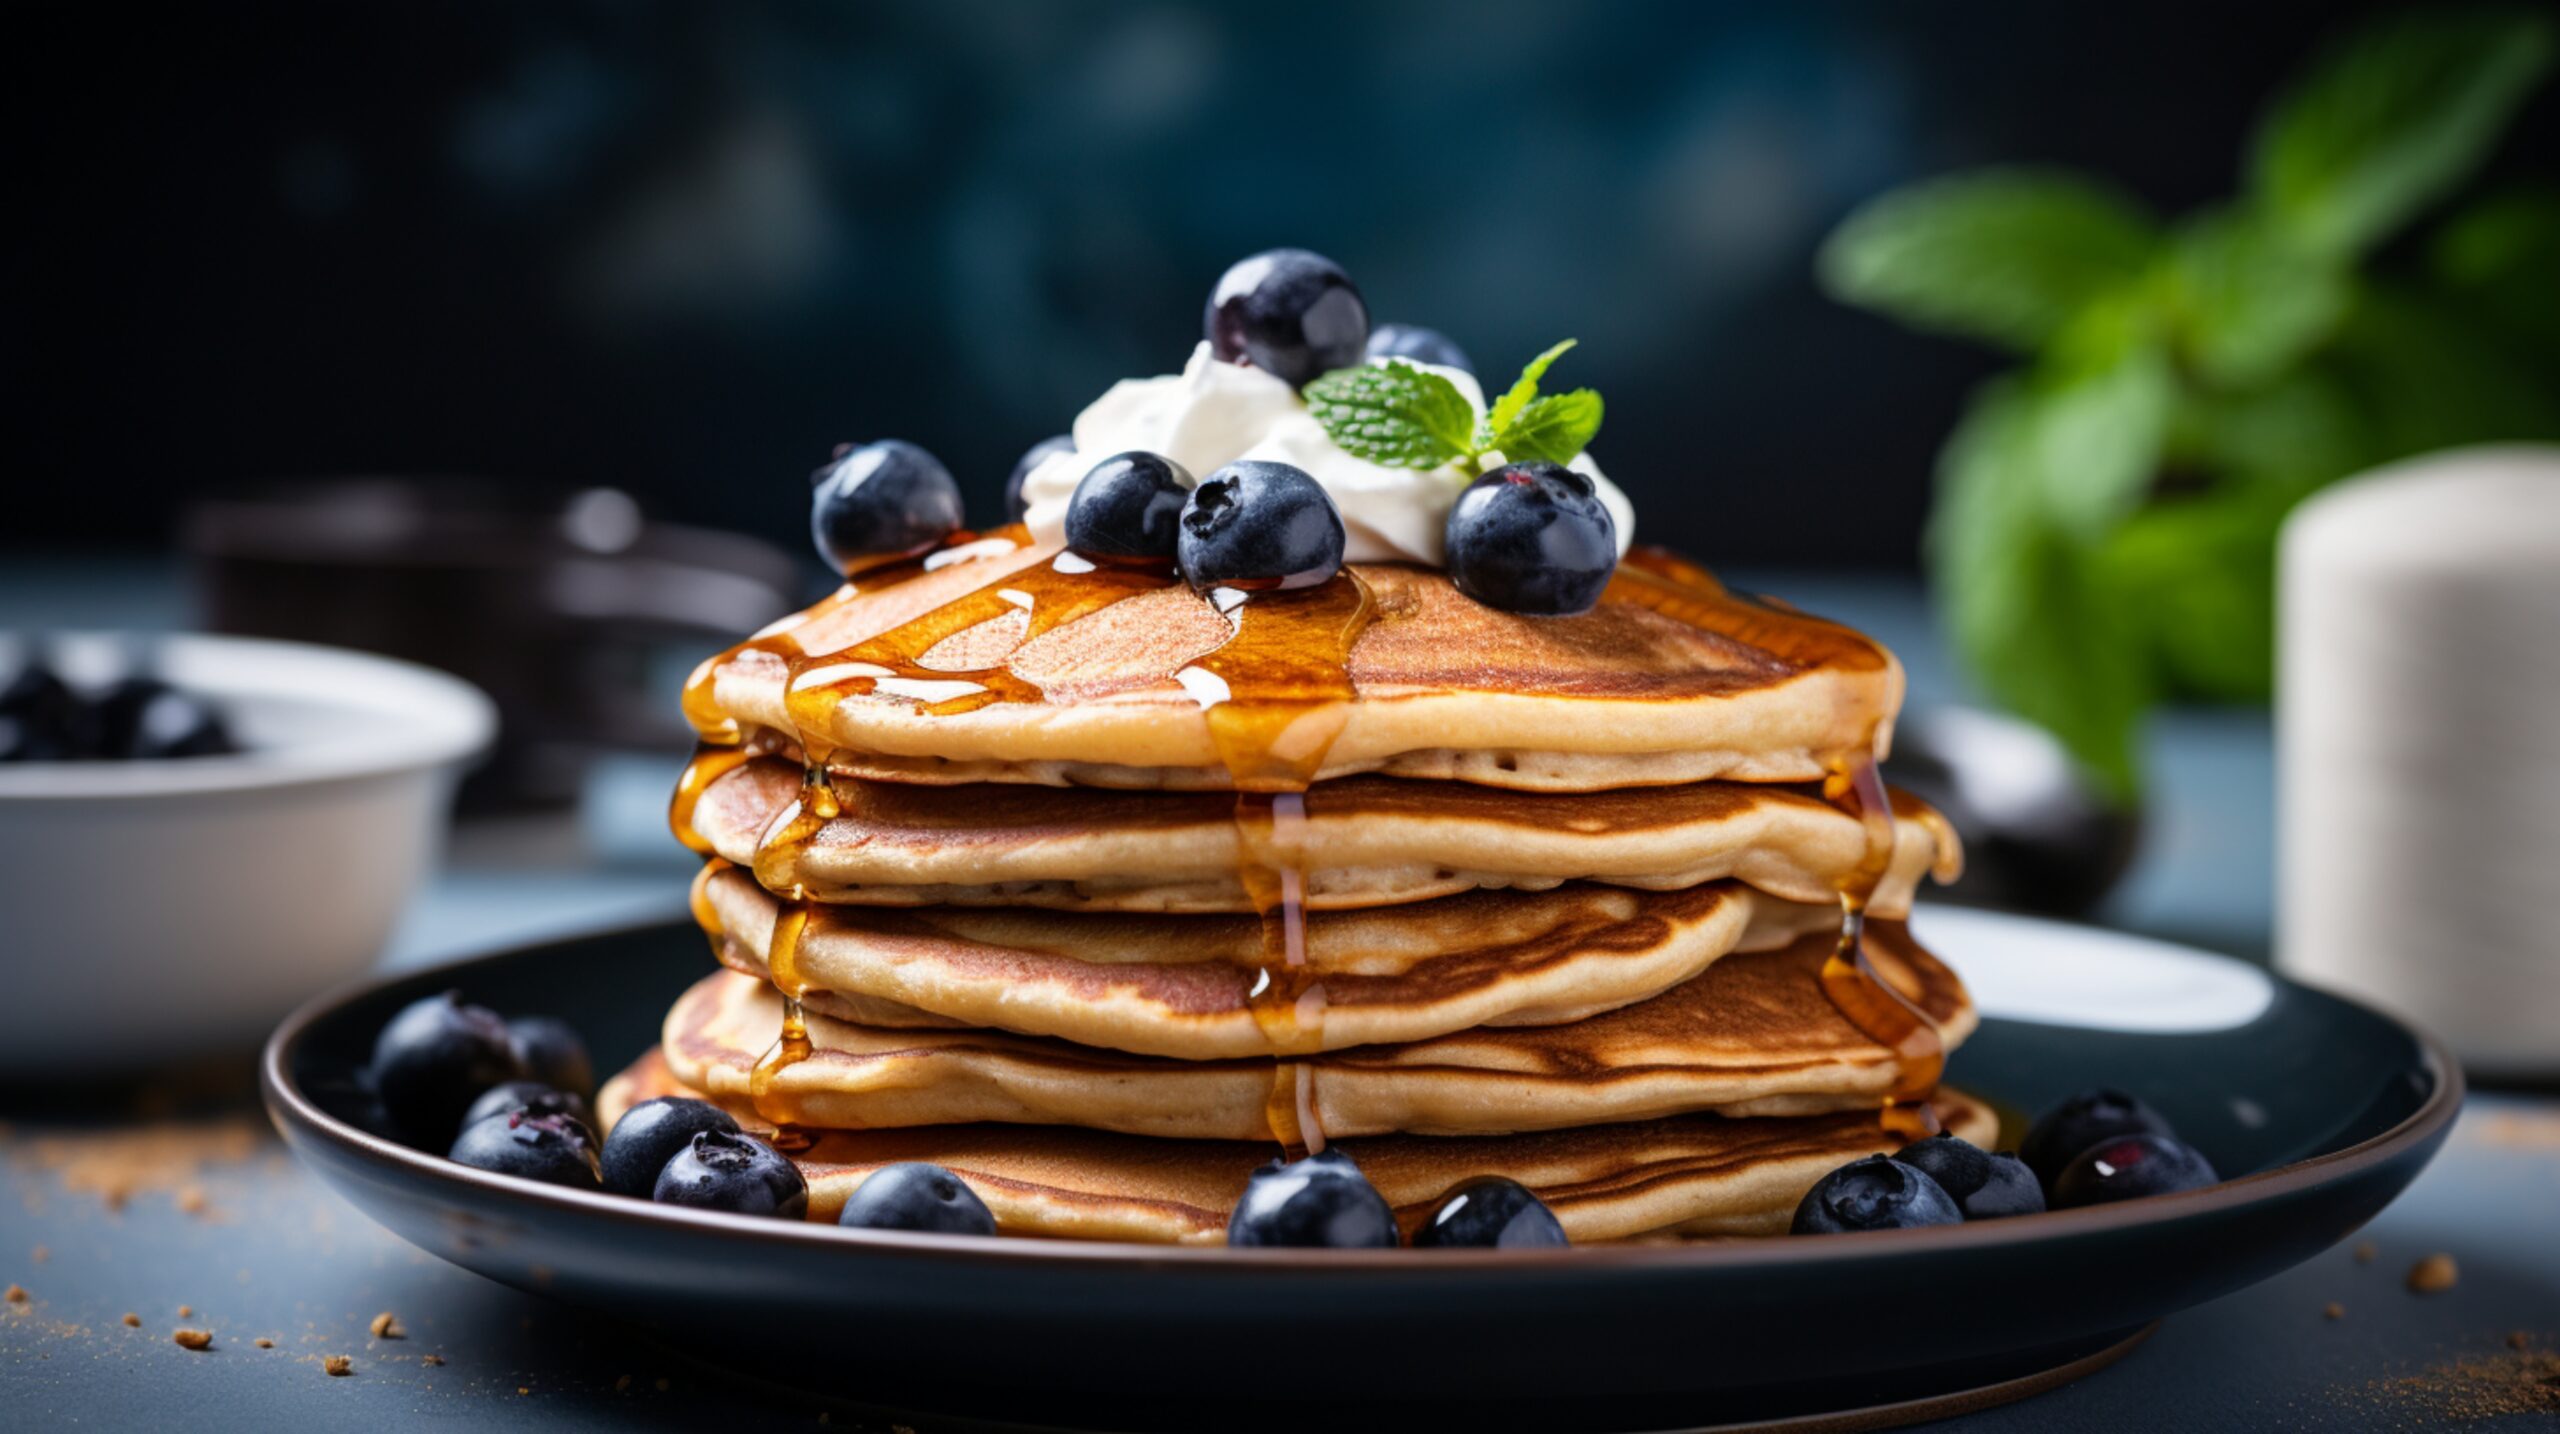 Healthy Pancake Recipes - Whole wheat and blueberry pancakes 